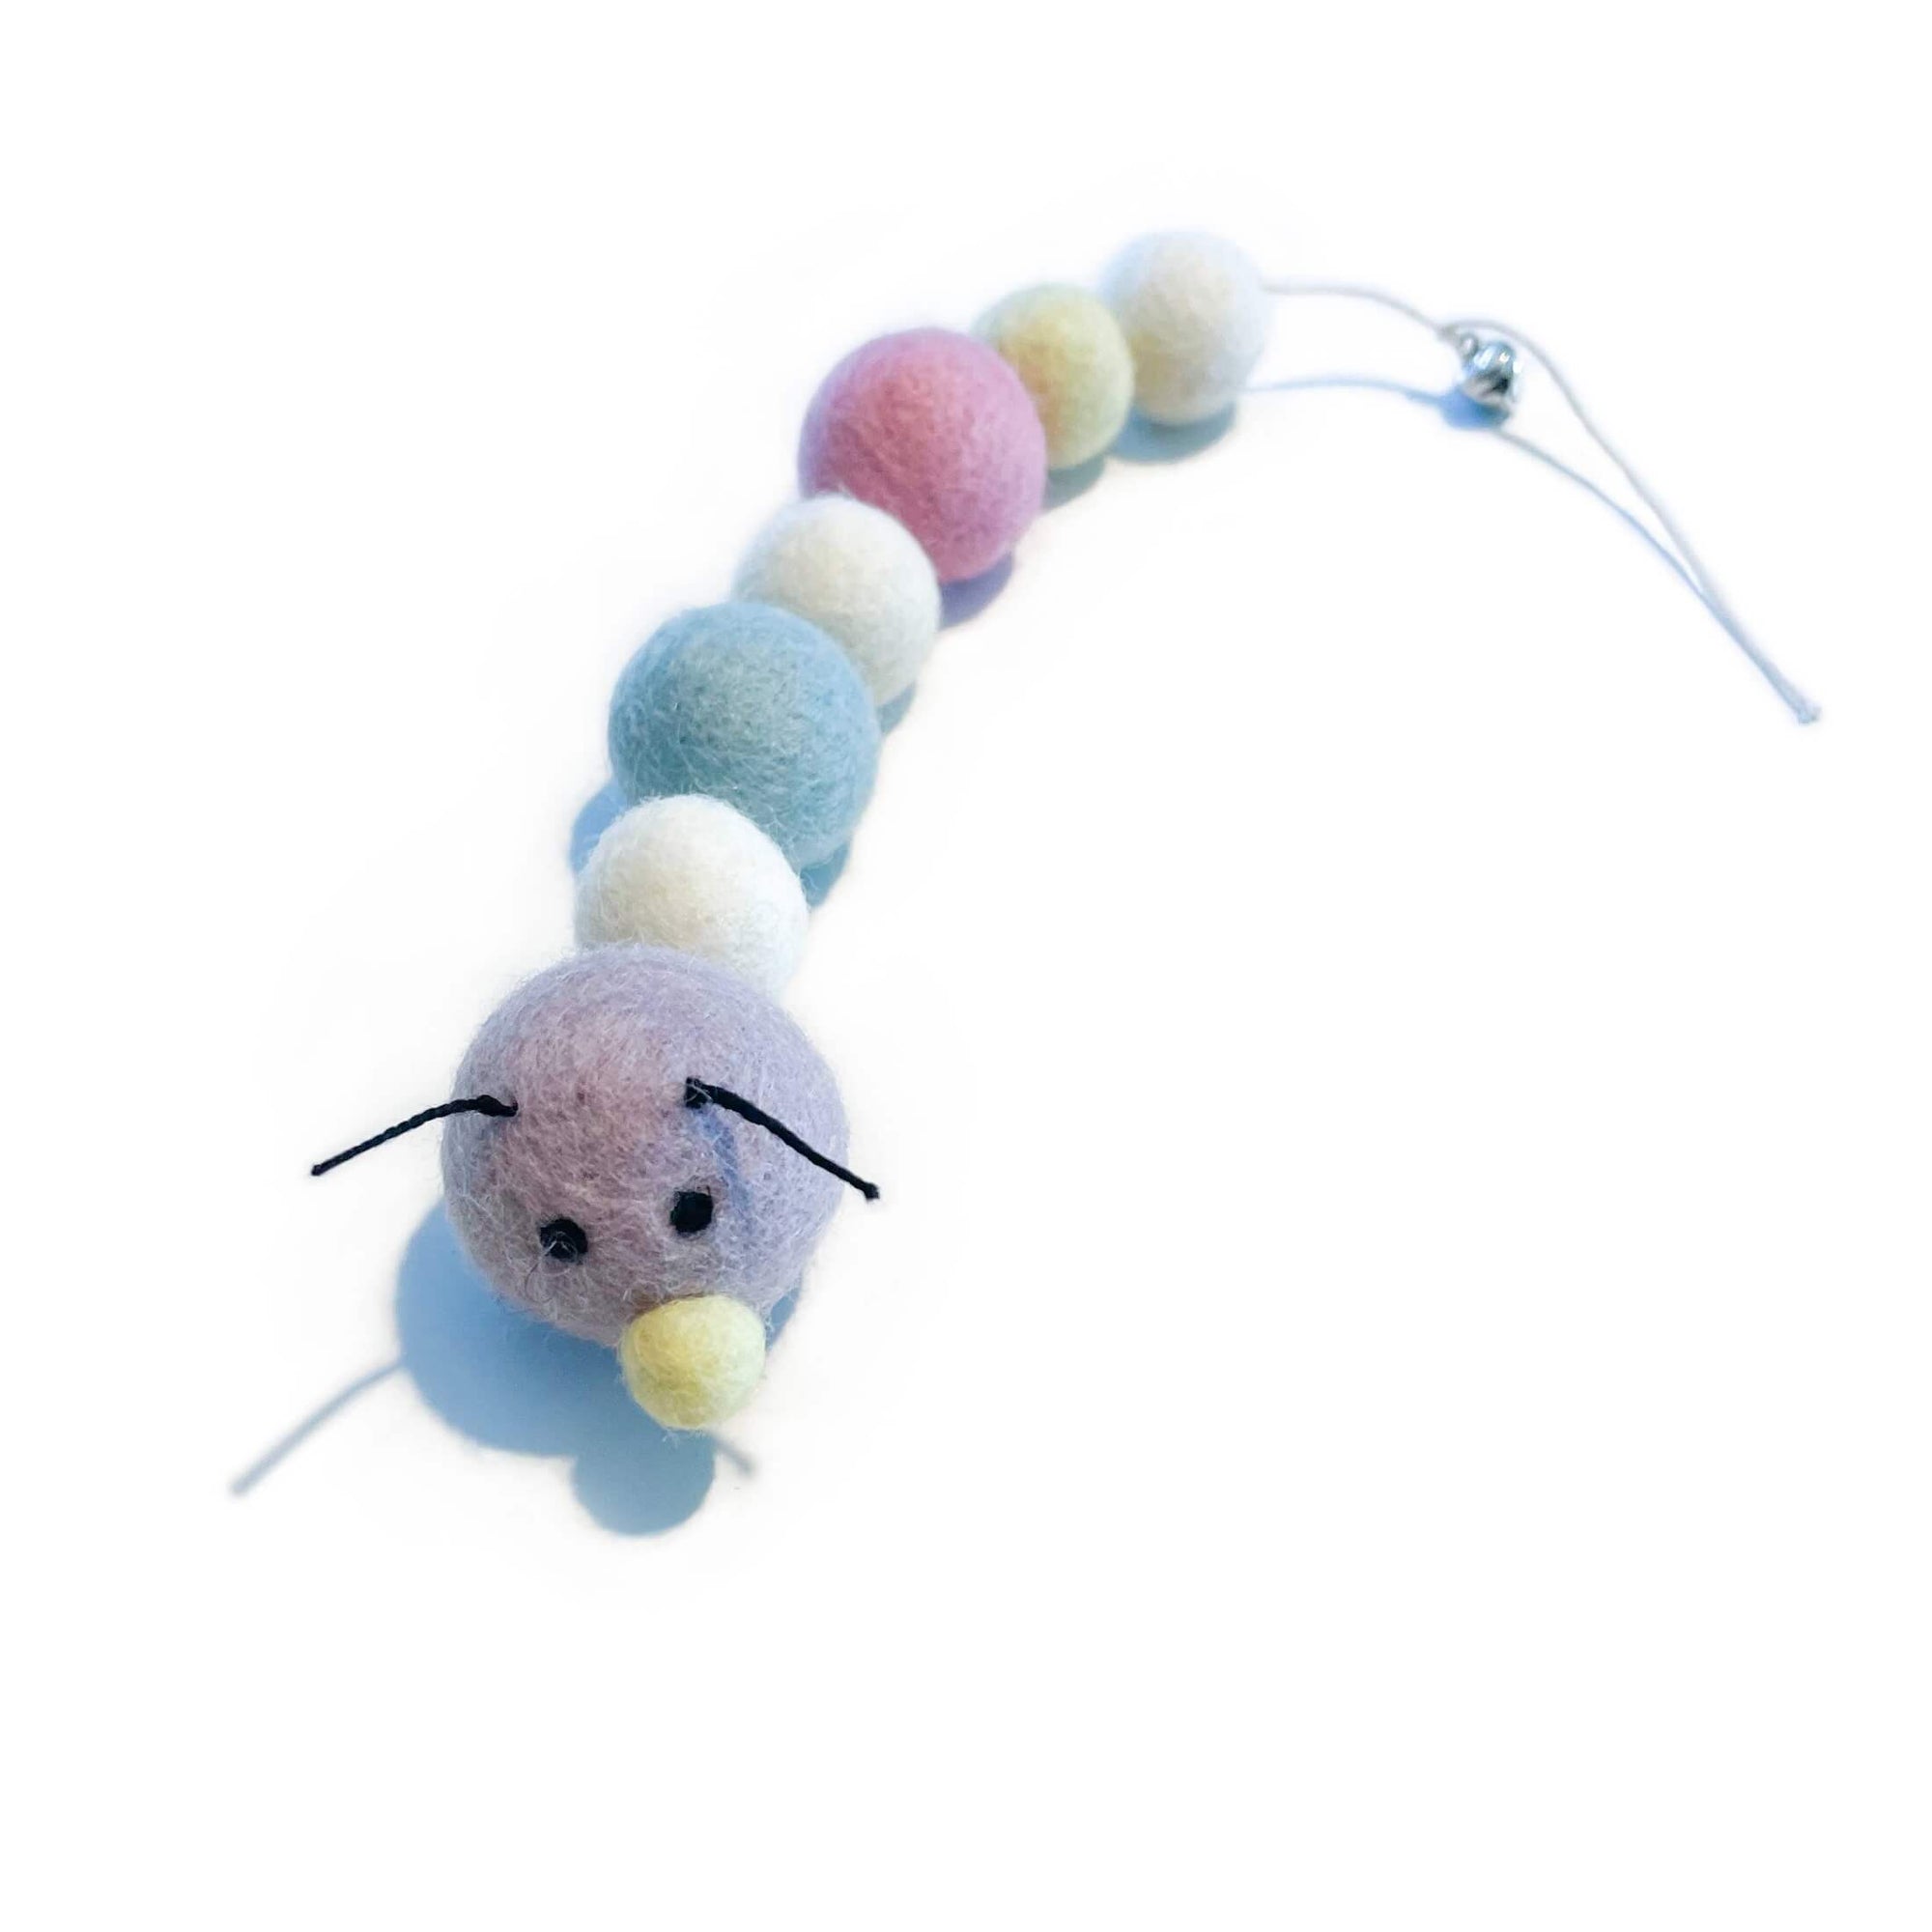 Organic wool caterpillar cat toy in pastel tones (purple, white, blue, pink & yellow). Has bell at the end of its tail.